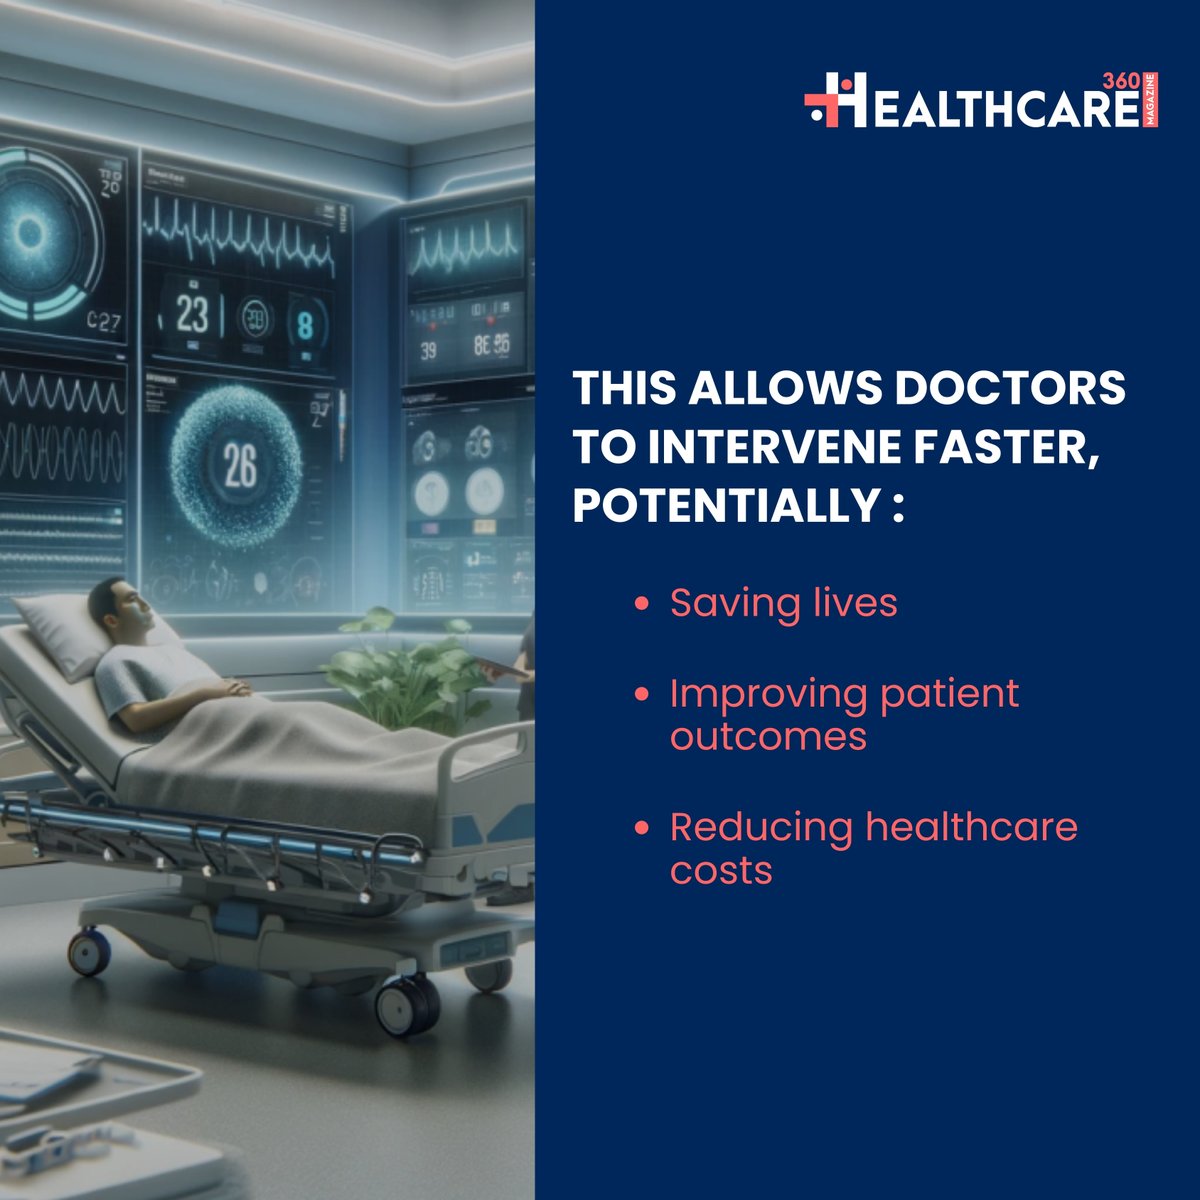 Tech for good? We think so! What healthcare innovations excite you? 

#AIforHealth #SepsisDetection #EarlyDiagnosis #HealthTech #MedicalAI #SaveLives #PatientCare #HealthcareInnovation